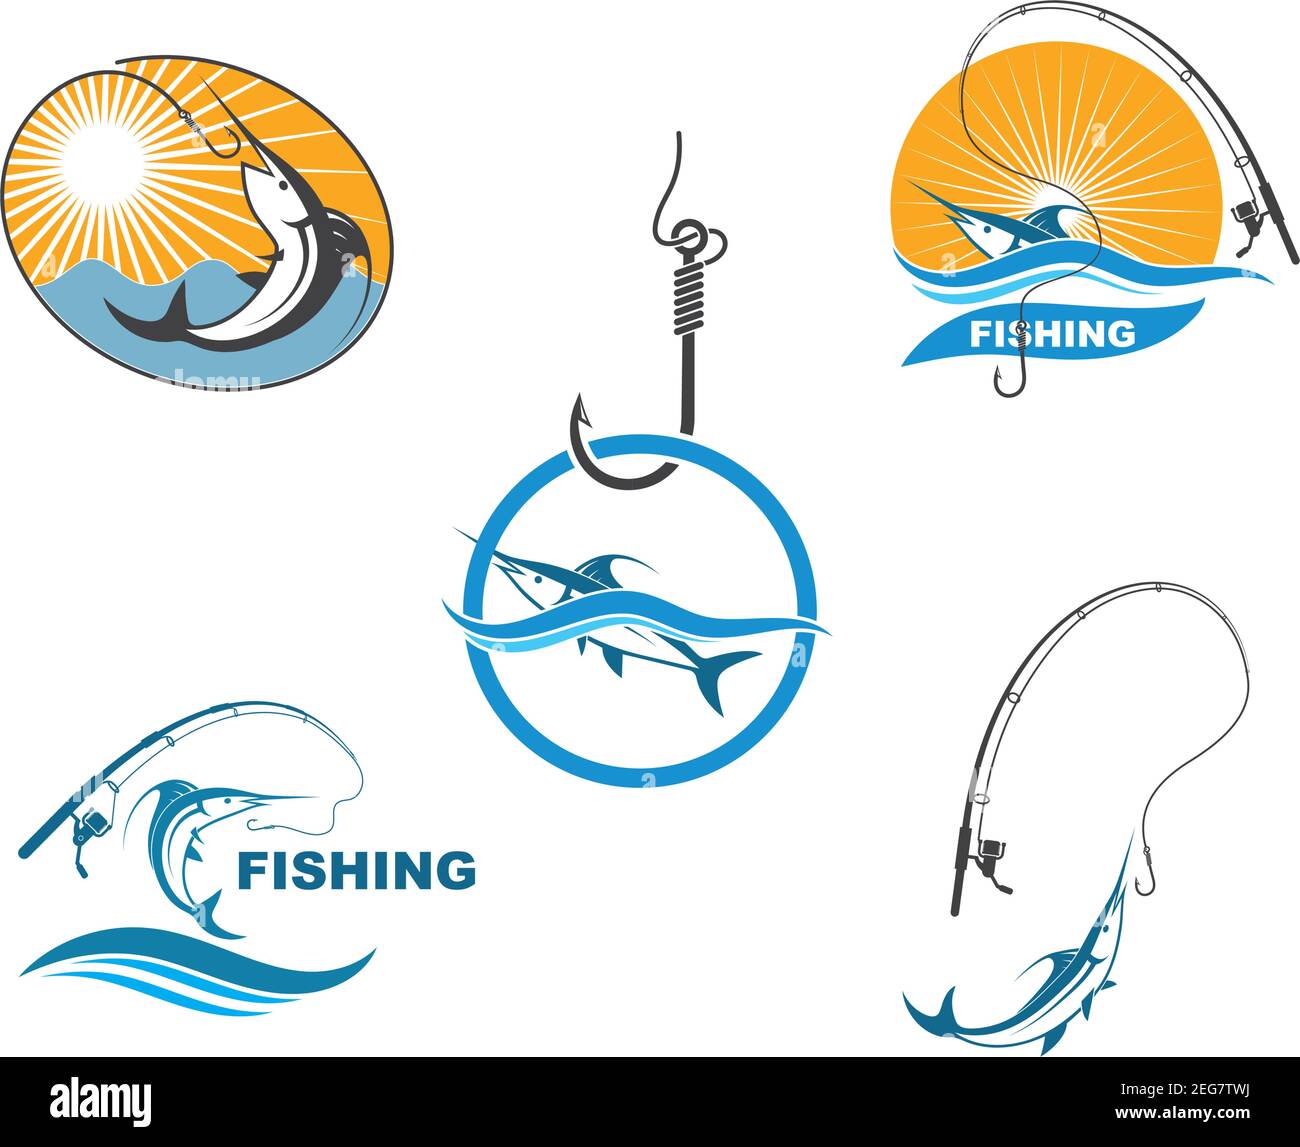 Tournament bass fishing Stock Vector Images - Page 3 - Alamy